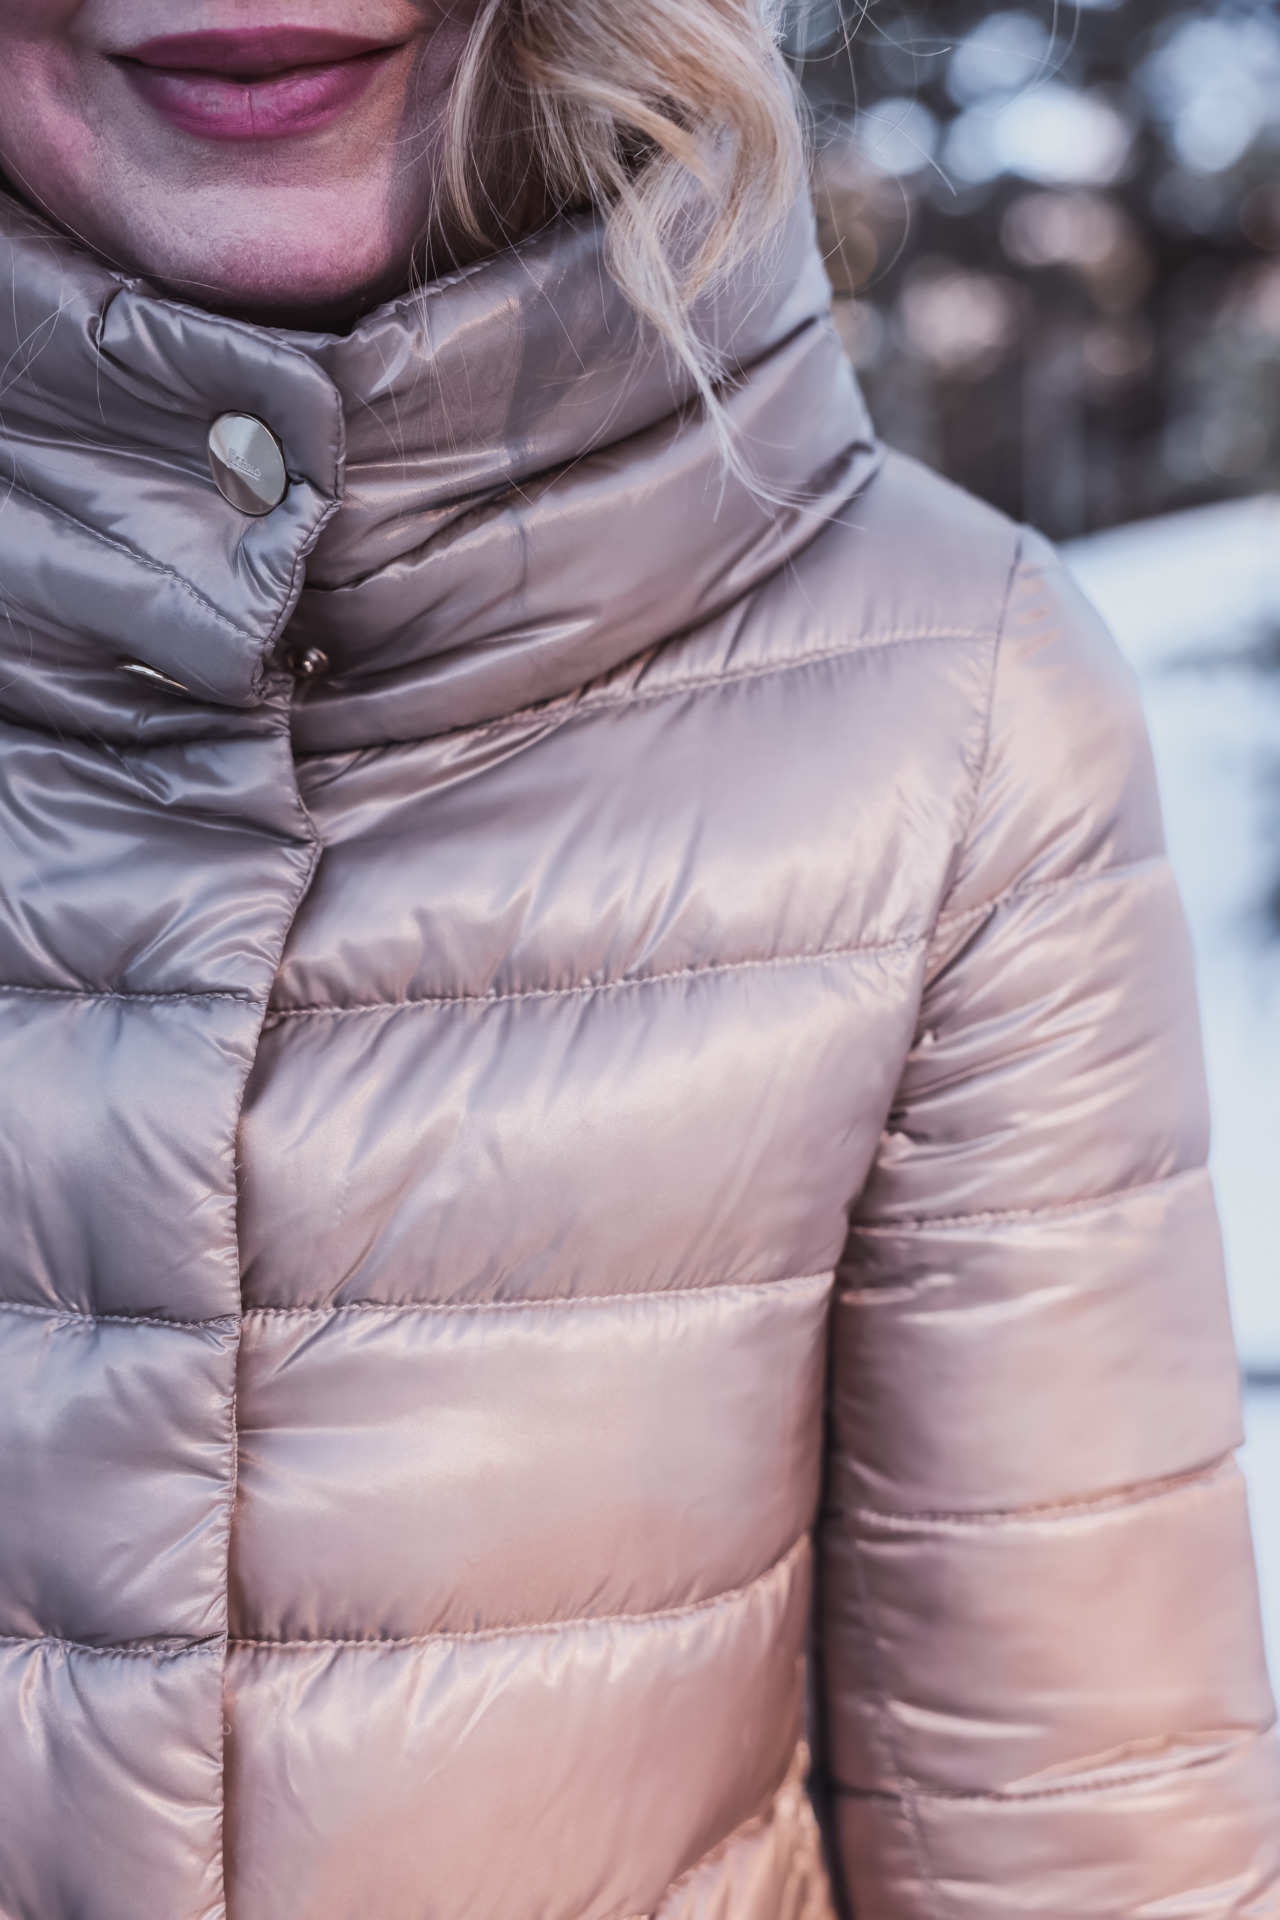 Warmest Coats and Jackets for Winter